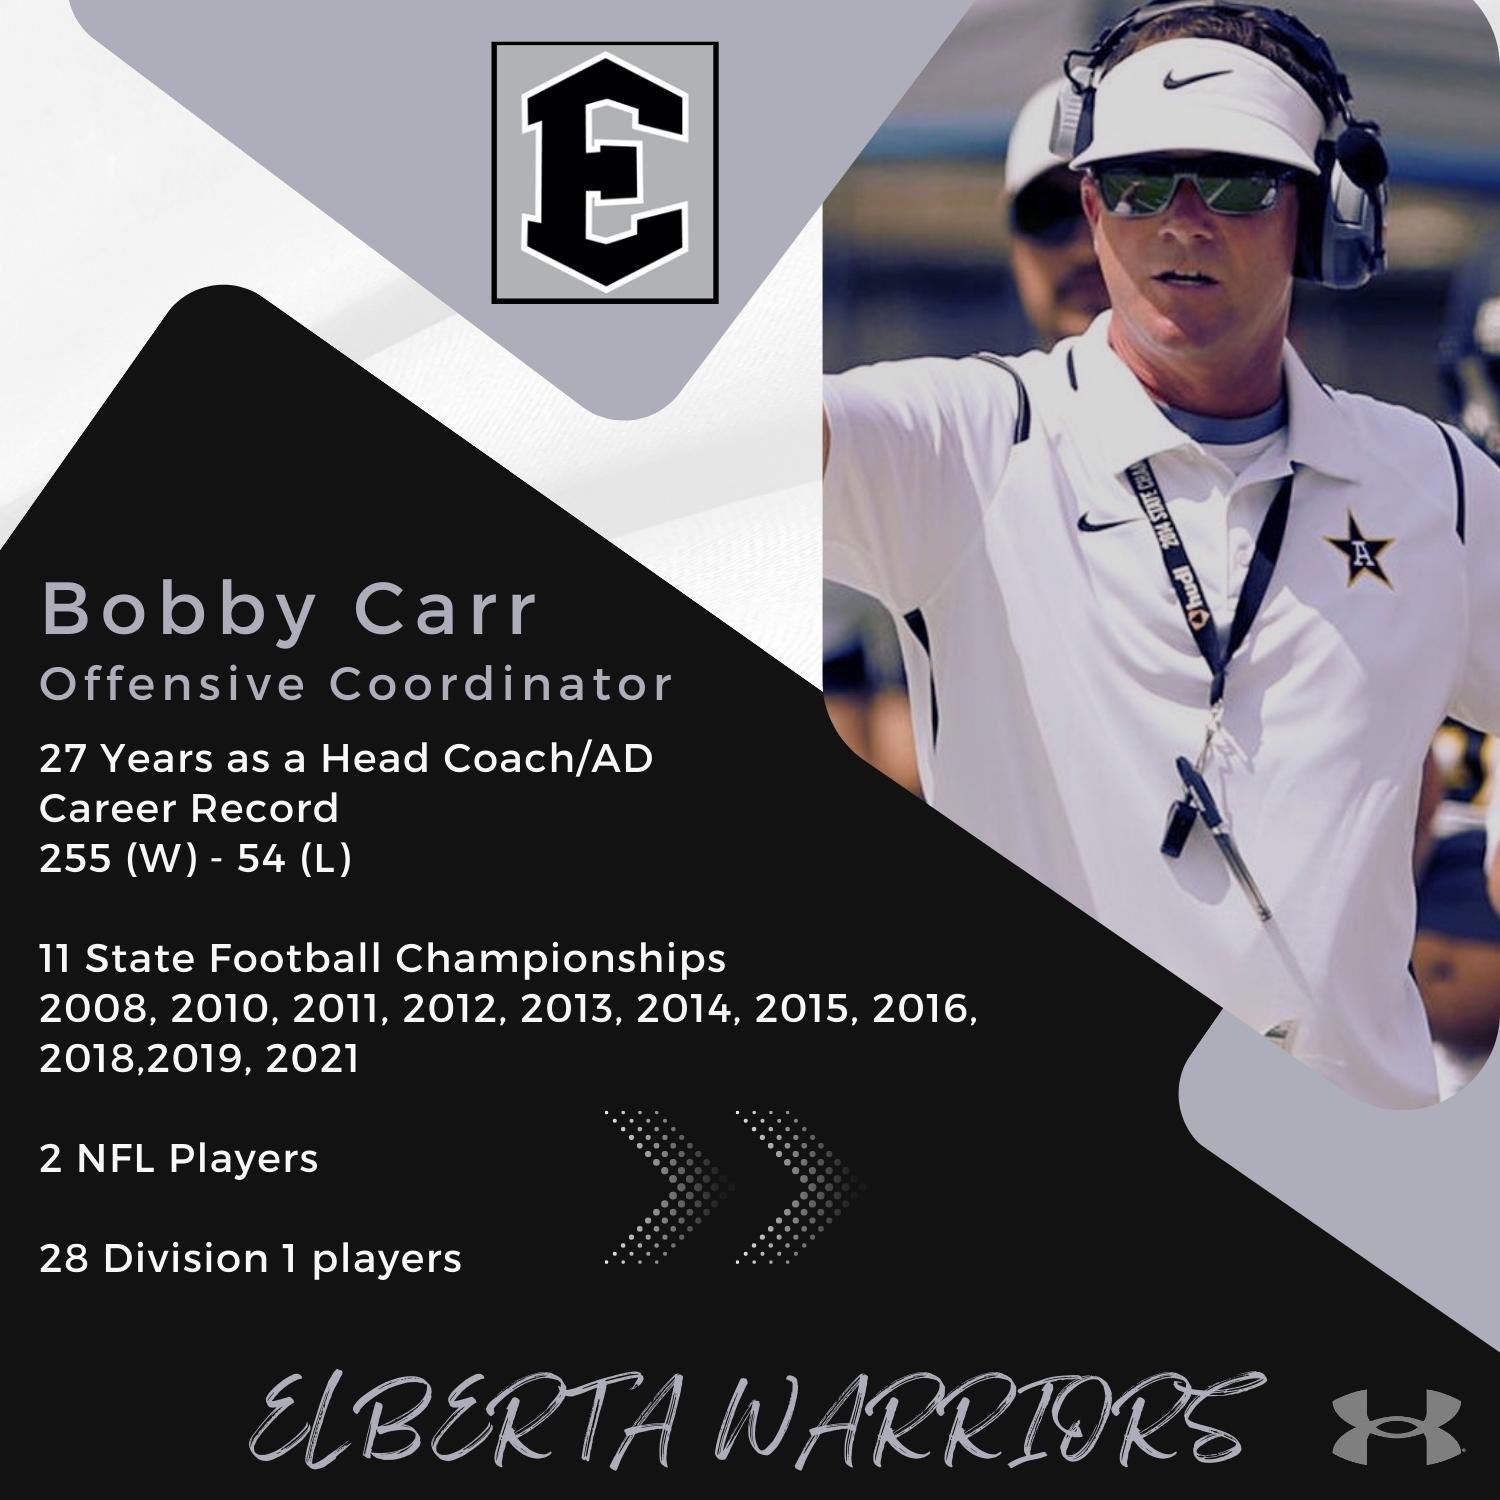 The new offensive coordinator for the Elberta Warriors, Bobby Carr, brings 27 years of head coaching experience and 11 state titles to his next stop. Carr also coached baseball during his 15 seasons at Edgewood Academy and won 11 state championships on the diamond as well.